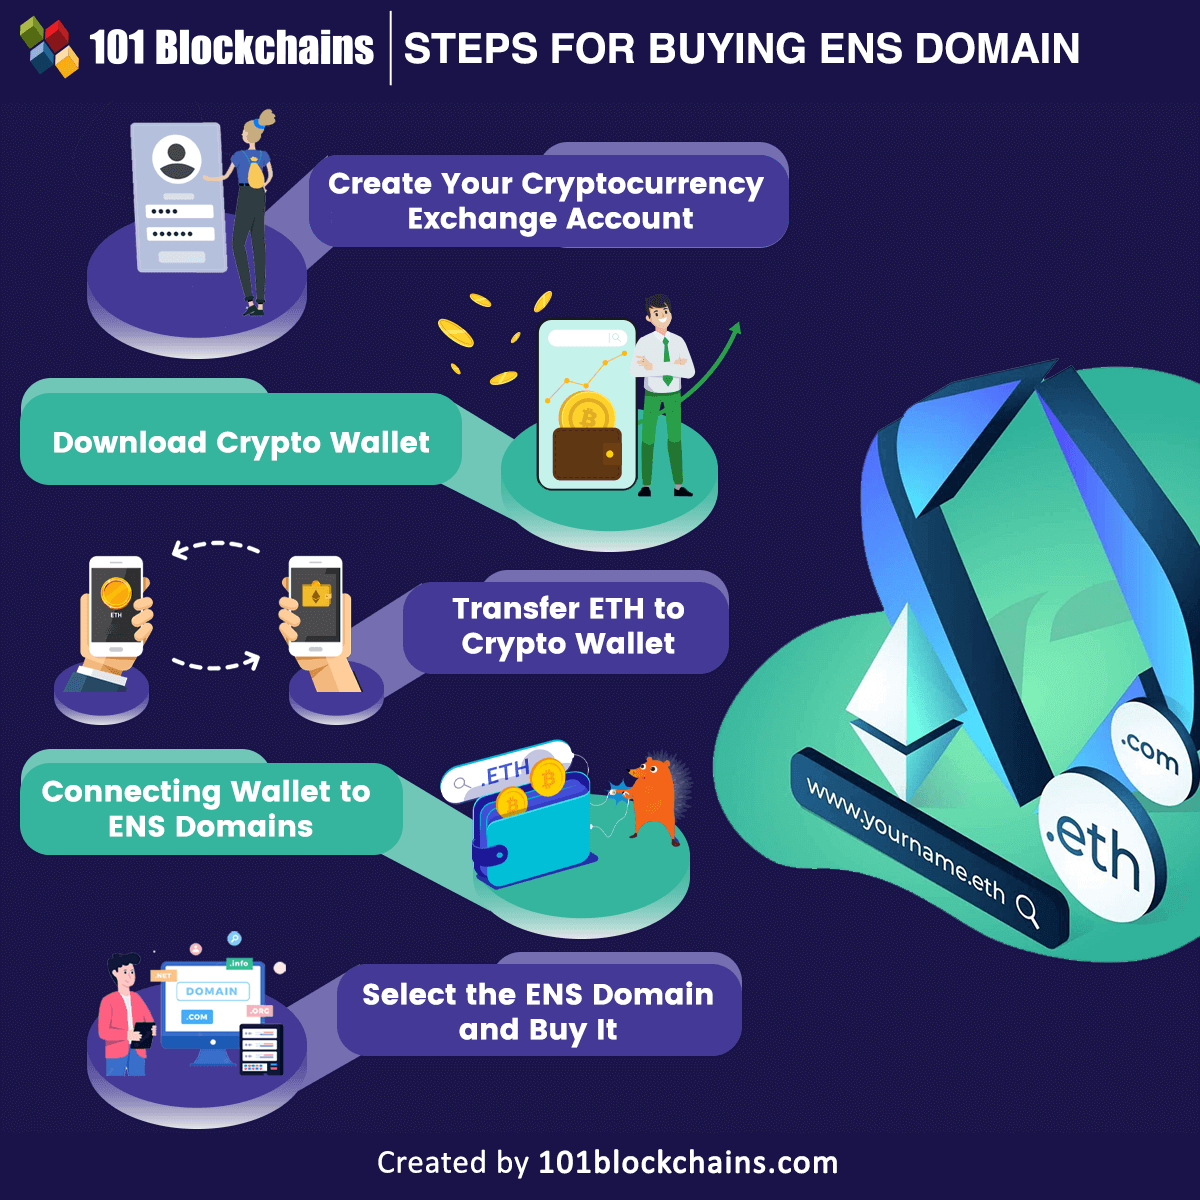 Steps for Buying ENS Domain